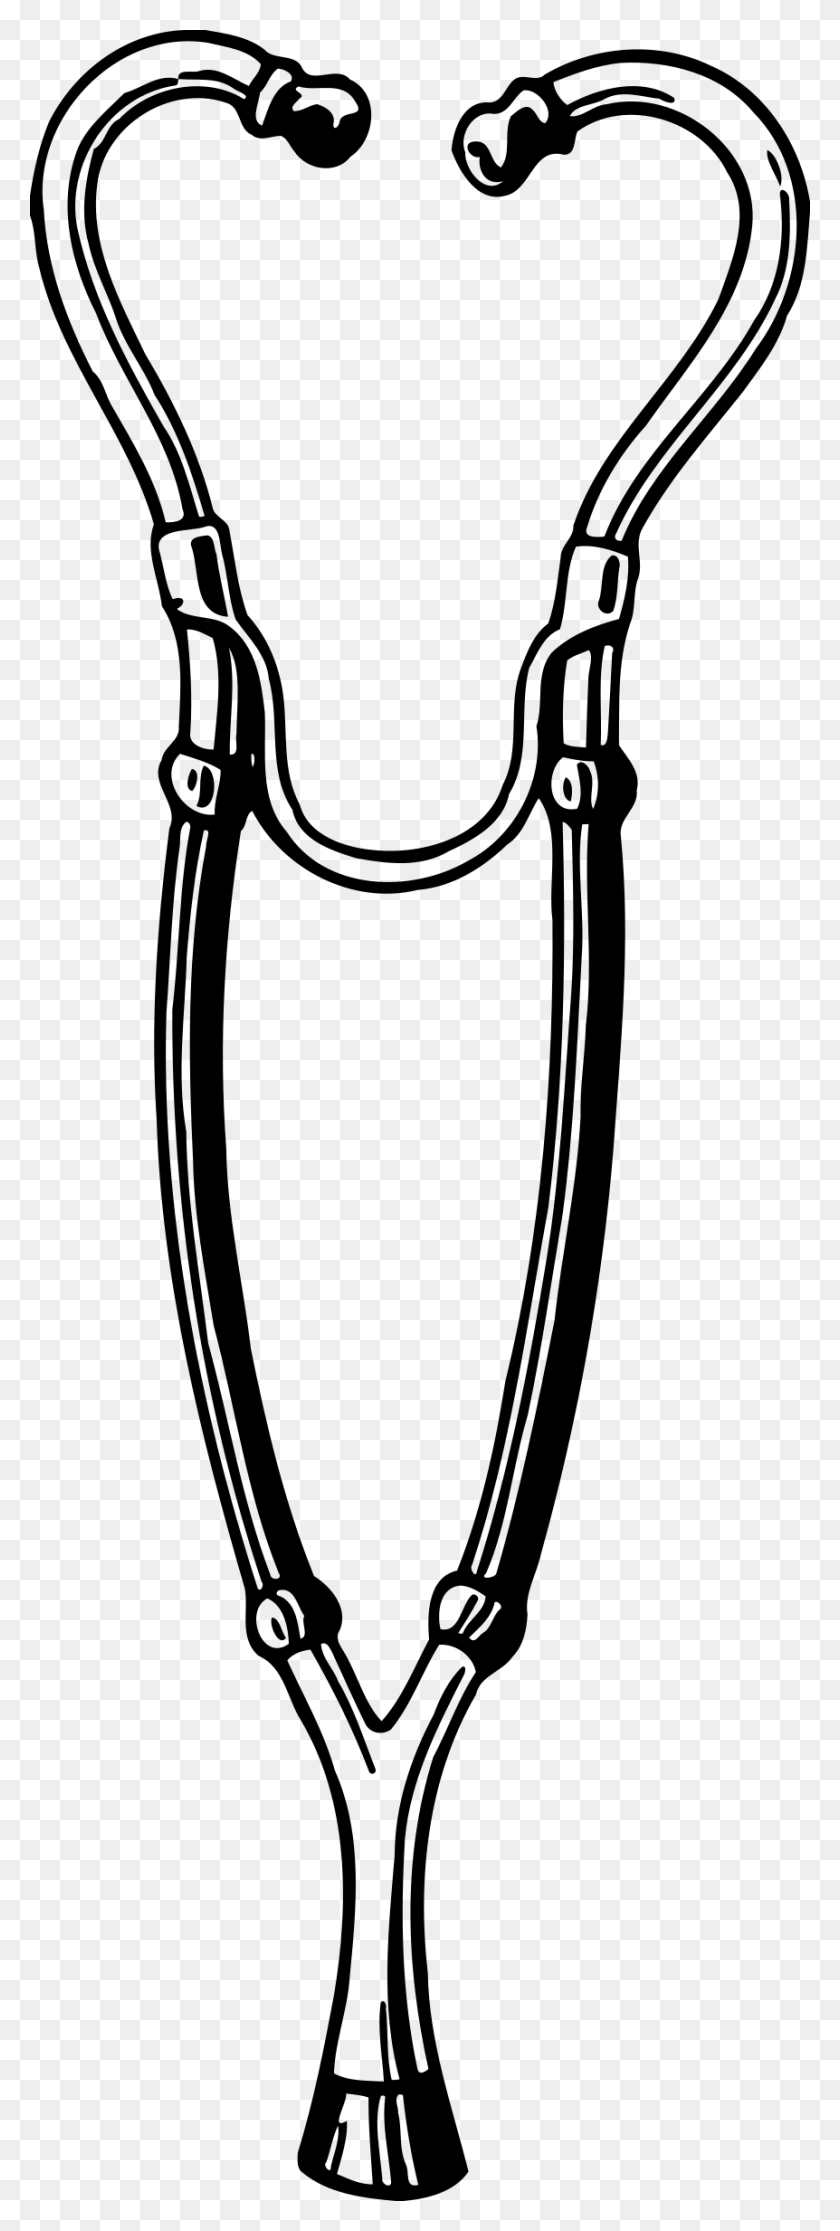 Clipart - Stethoscope Clipart PNG